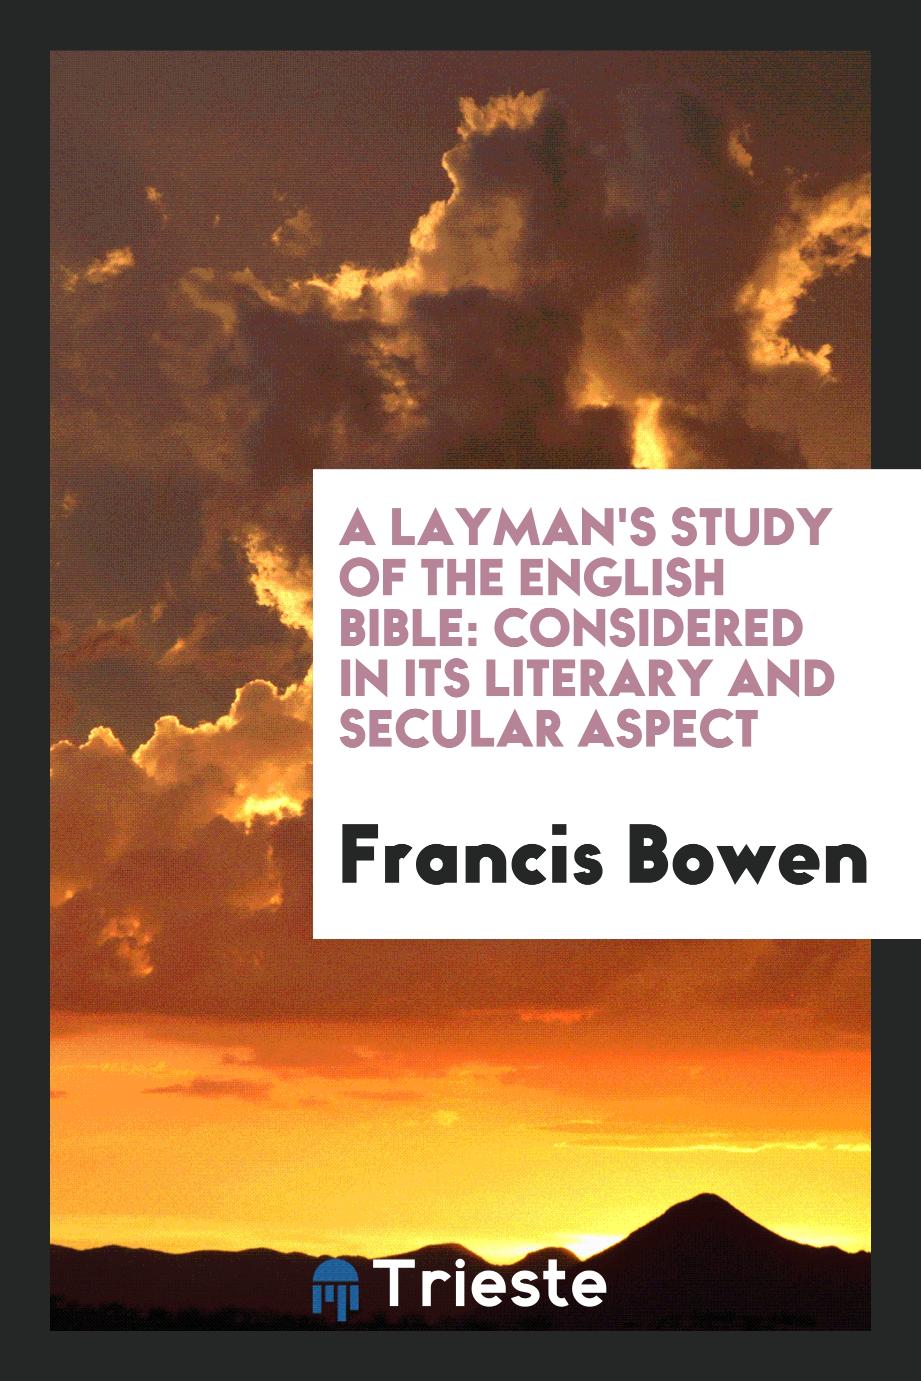 A Layman's Study of the English Bible: Considered in Its Literary and Secular Aspect